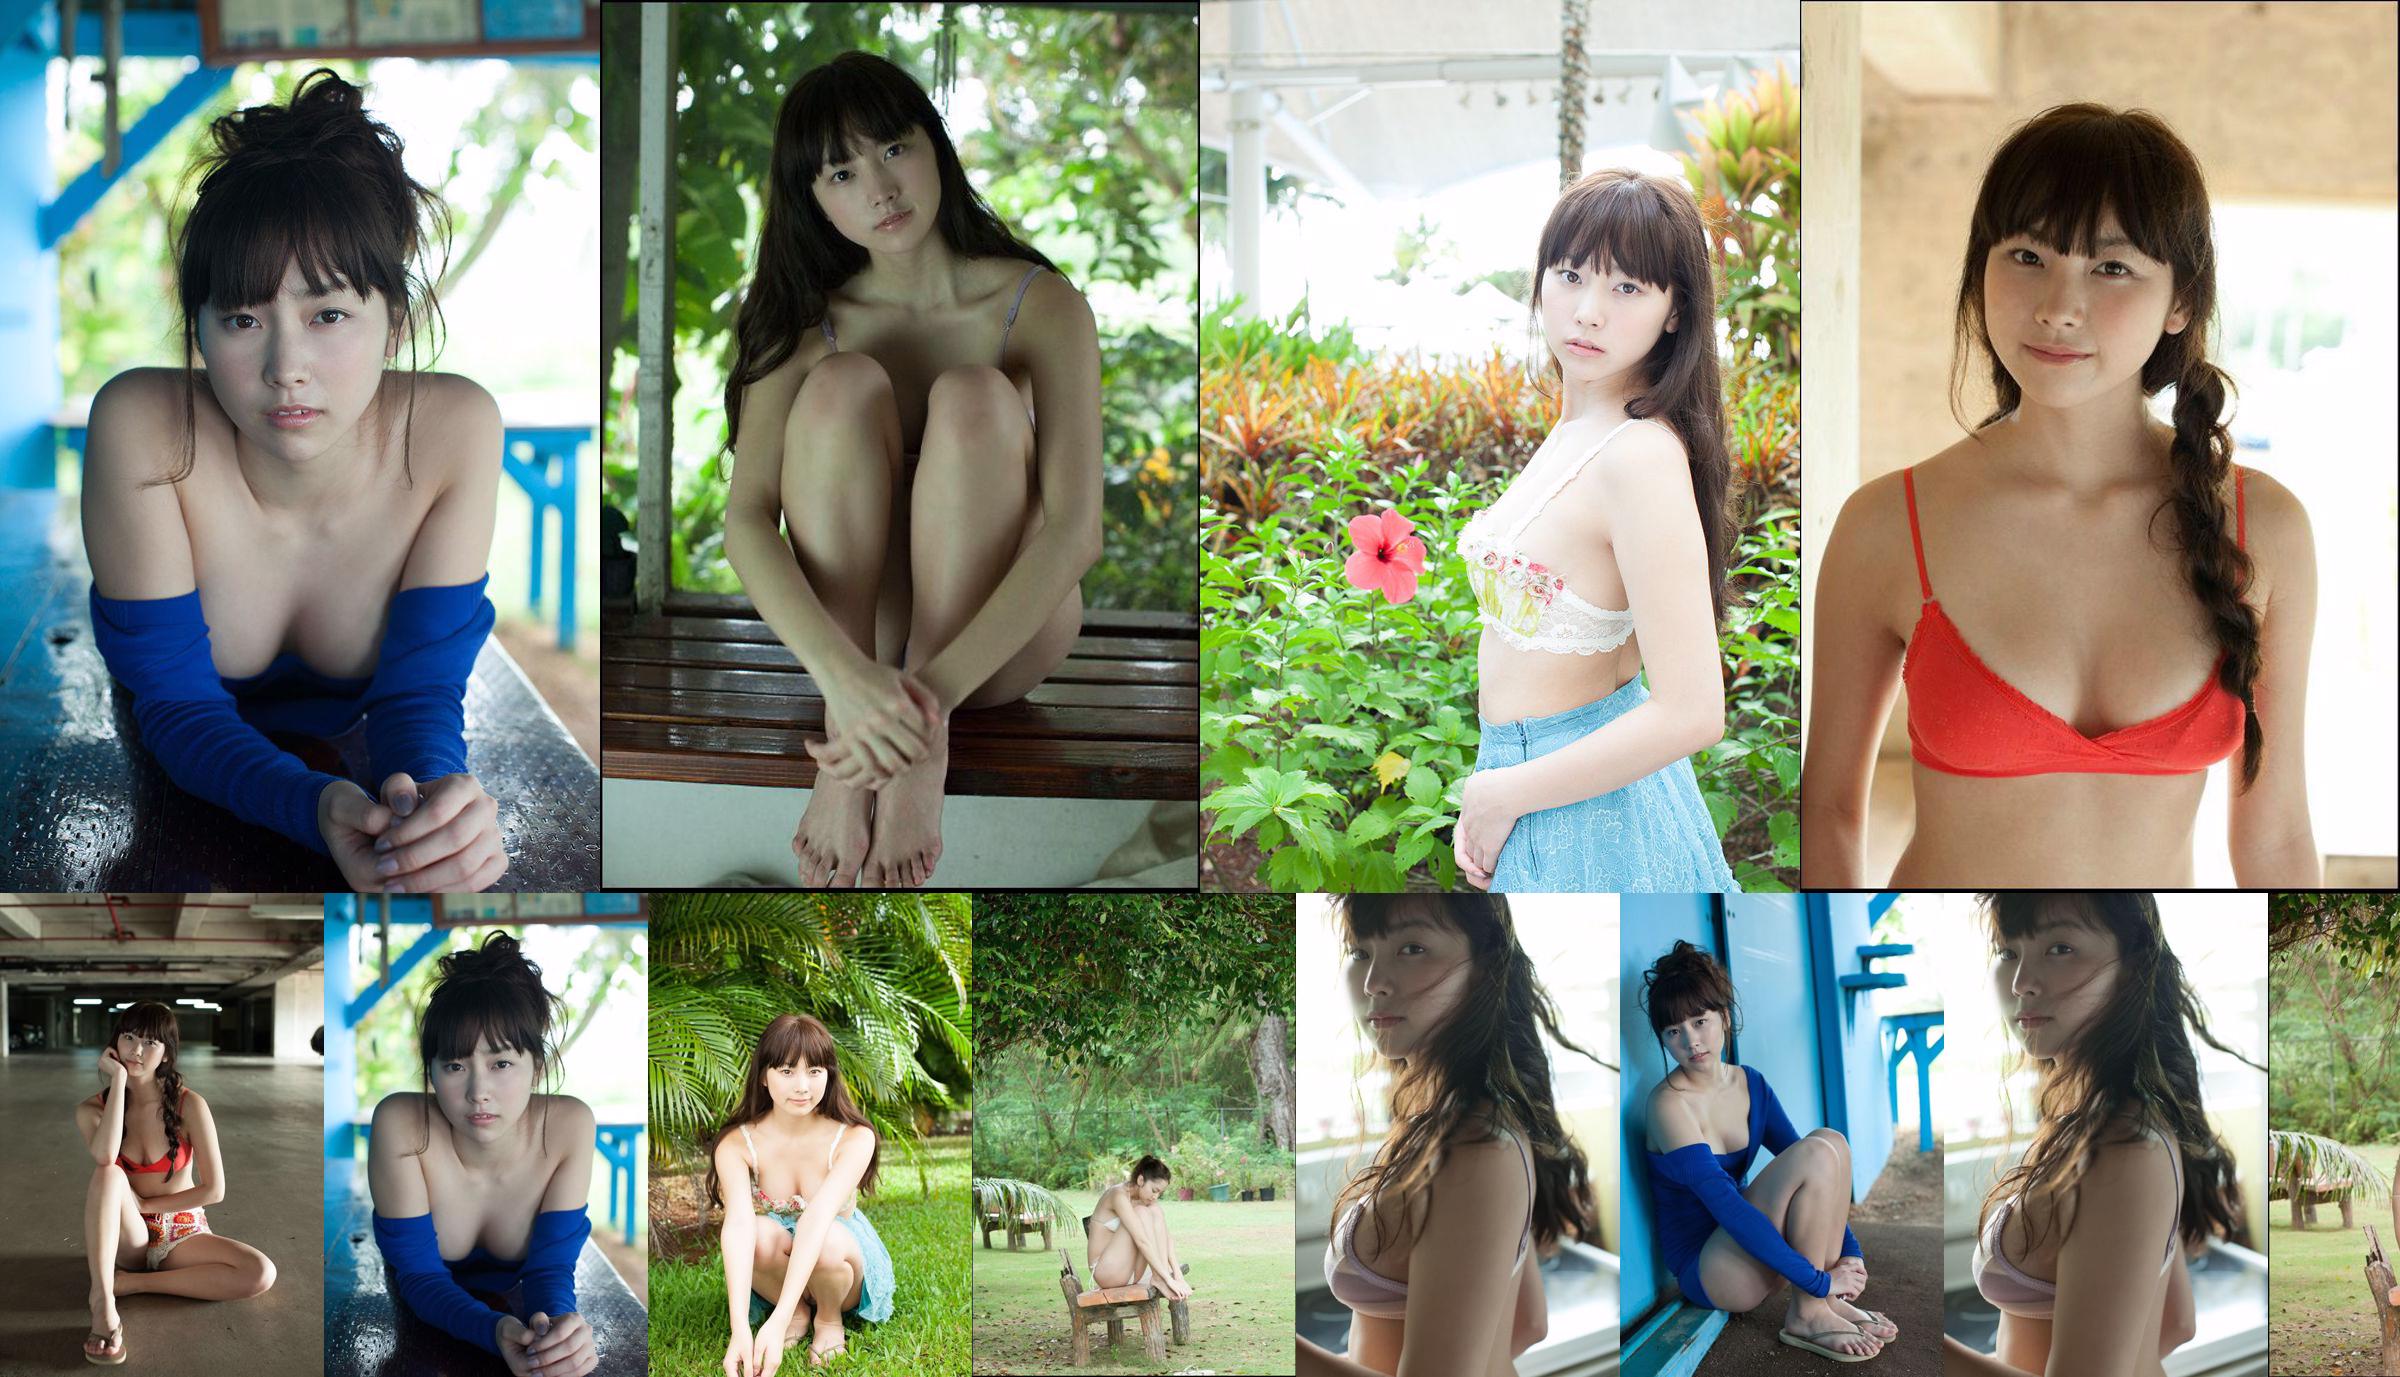 Chika Ojima "STARTING OVER" [Image.tv] No.ee3d98 Page 1